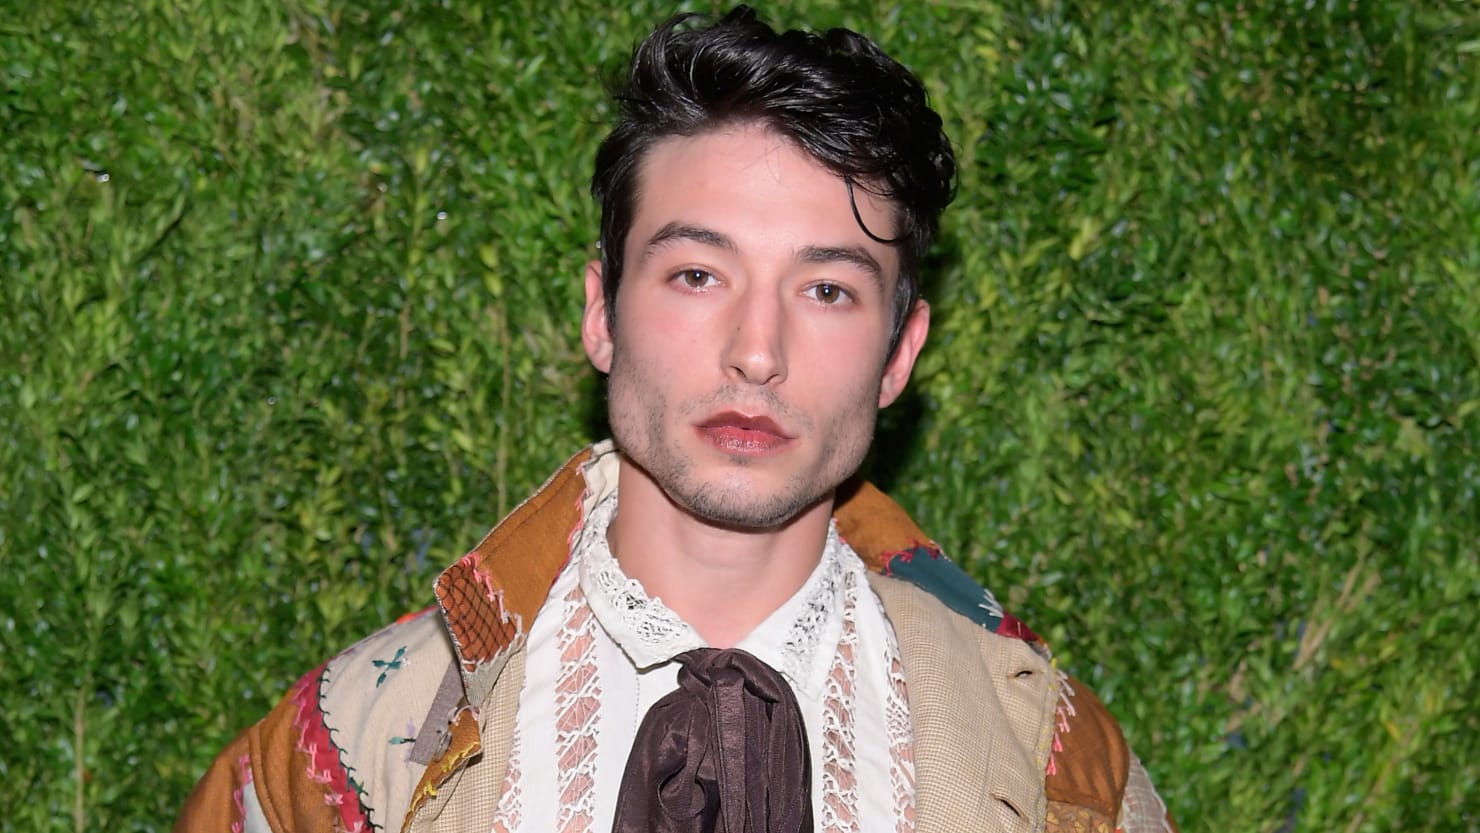 ‘Justice League’ fans should not forget the video of Attack Ezra Miller